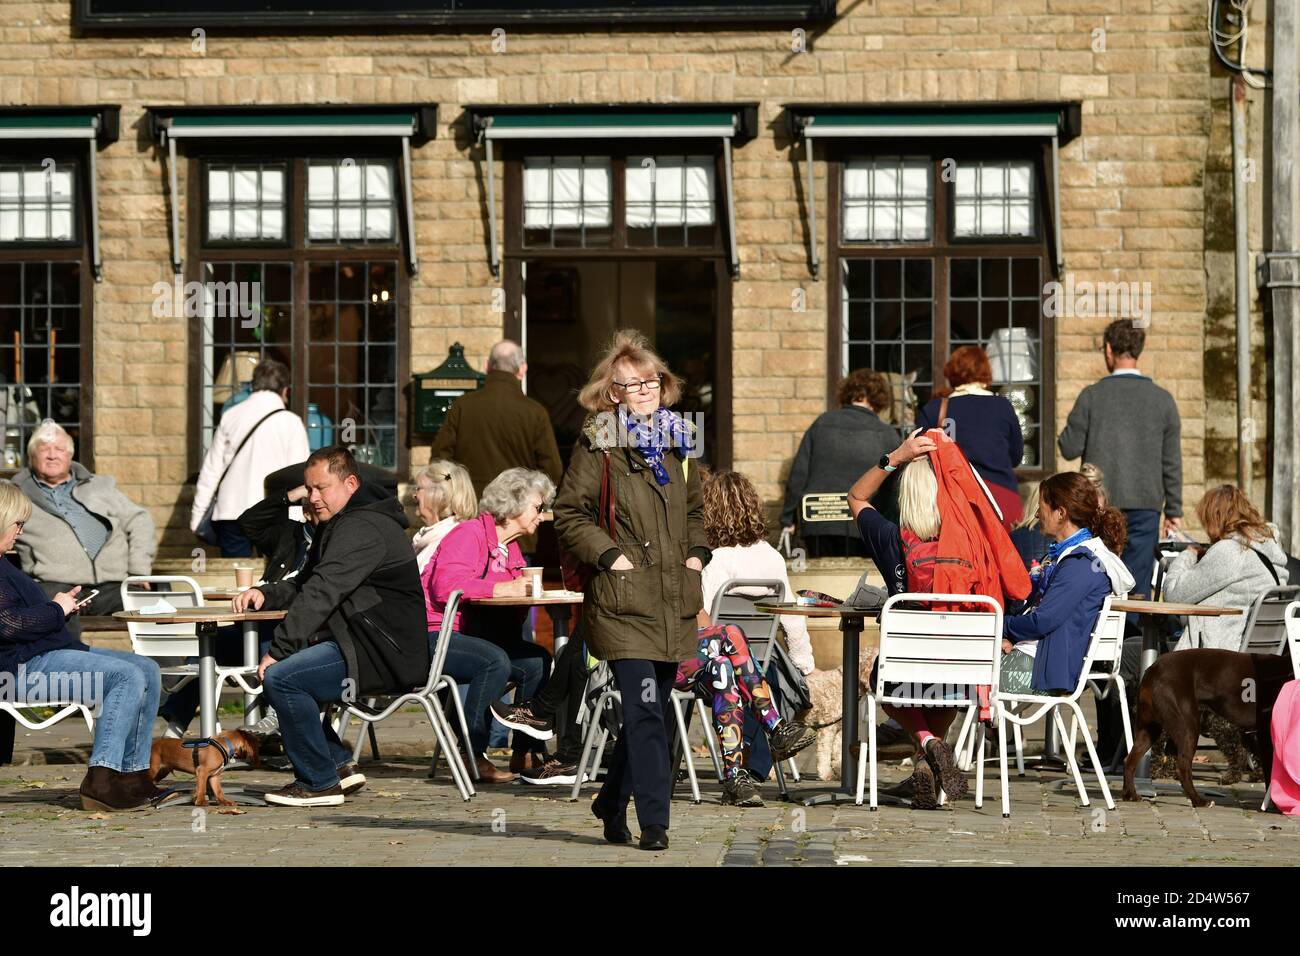 Wells, UK. 11th Oct, 2020. 11/October 2020. The New Normal, covid-19 eating out with red and white barriers separating people for social distancing at the City of Wells in Somerset on a warm and mild afternoon in October. Picture Credit: Robert Timoney/Alamy Live News Stock Photo